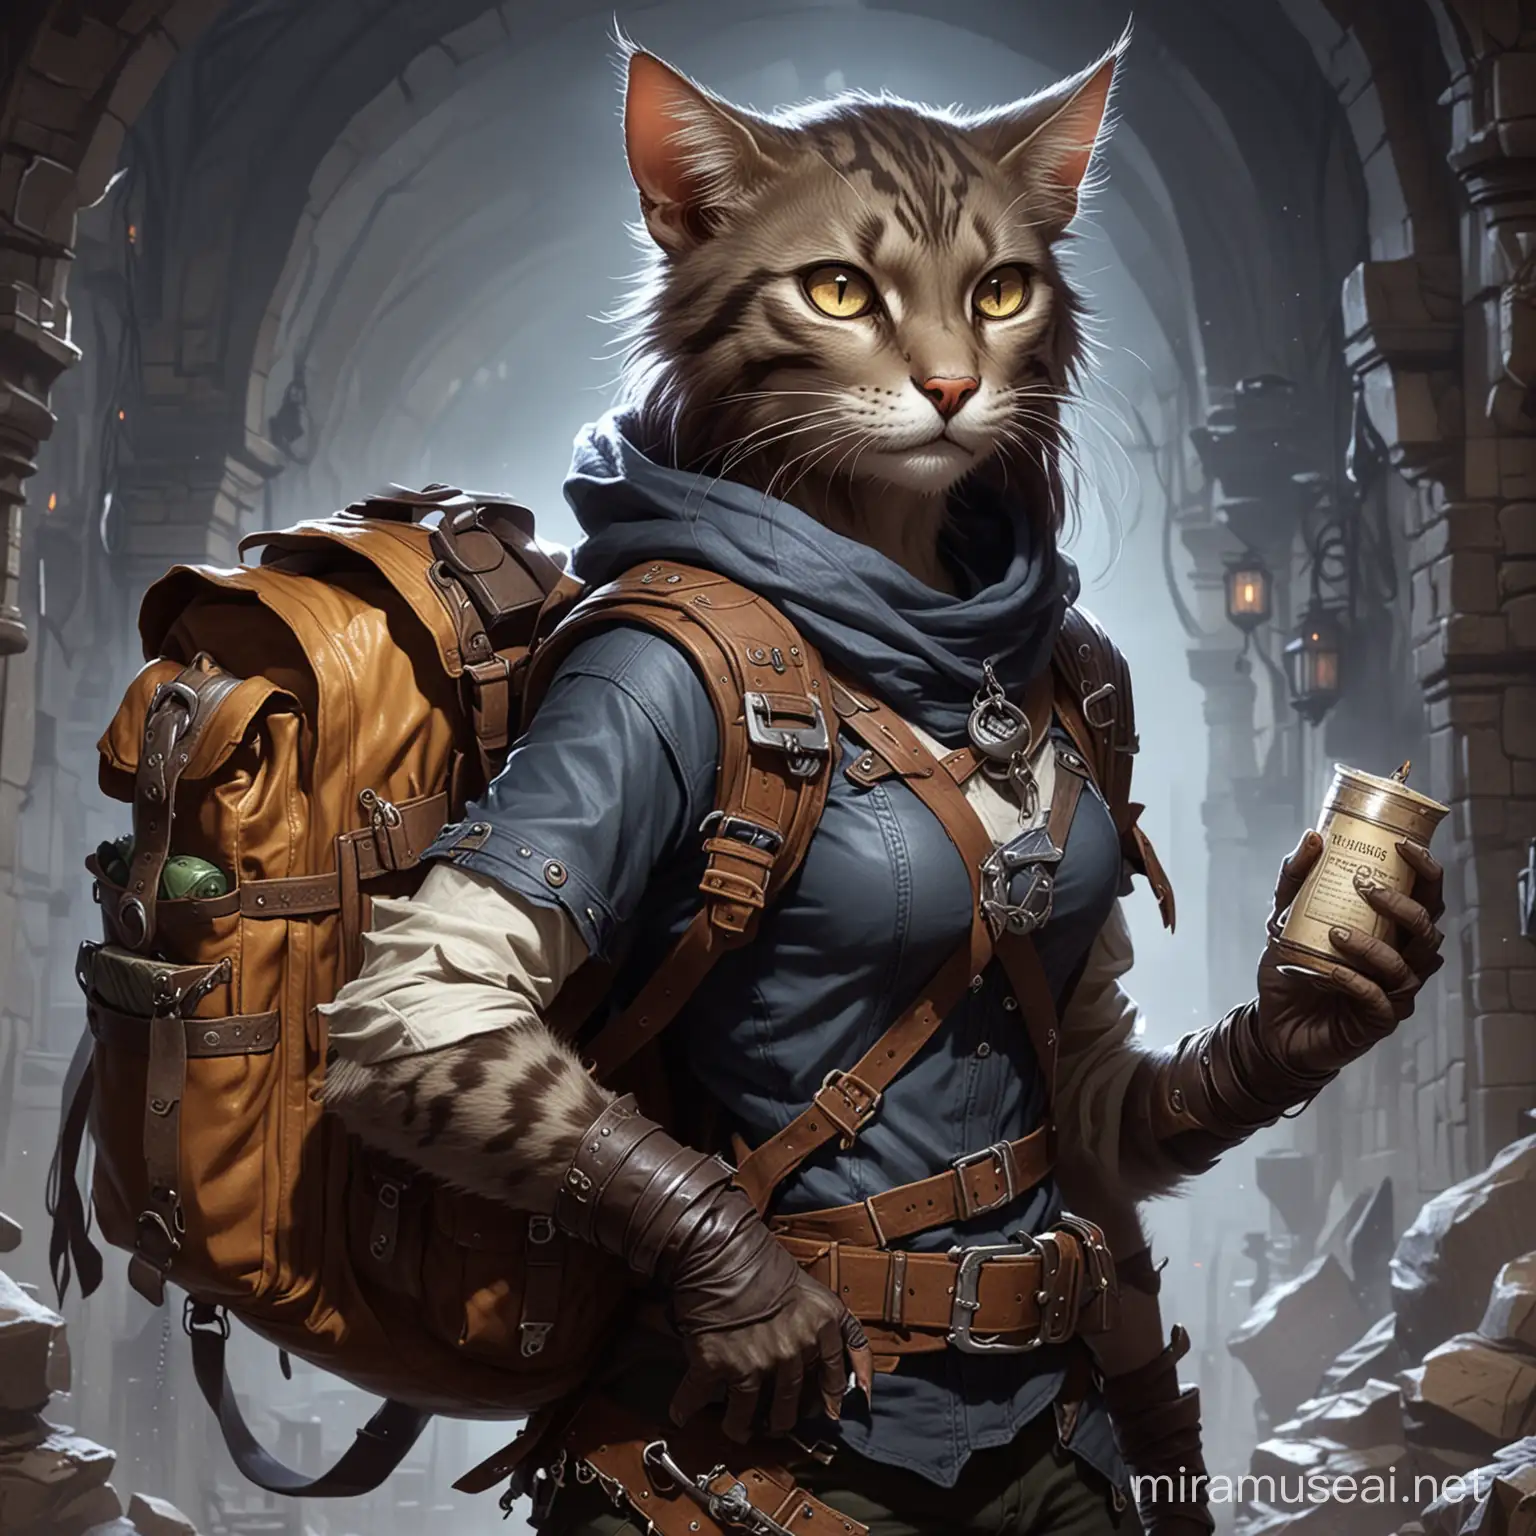 Sly Werecat Thief with Lootfilled Backpack in Dungeons and Dragons Adventure